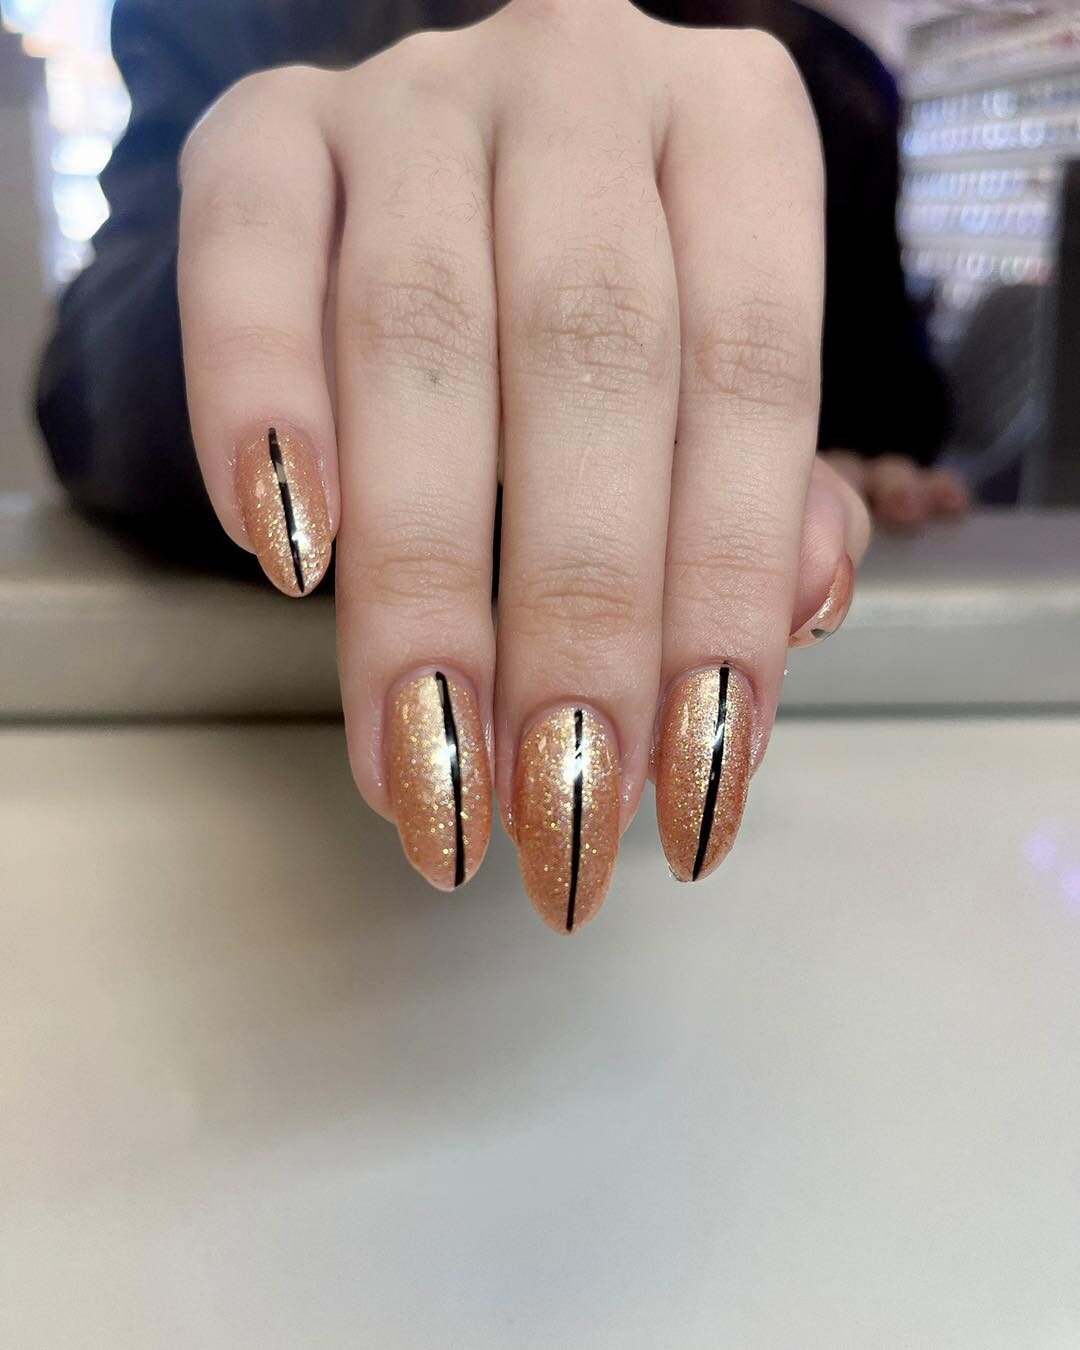 Don't let the weather take a toll on your nails. Book now with the link in our bio and we'll give them some much needed TLC!

#delawarenailsalons #pikecreekdelaware #nailsoftheweek #delawarenails #nailsofdelaware #landenbergpa #dippowdernails #delawa